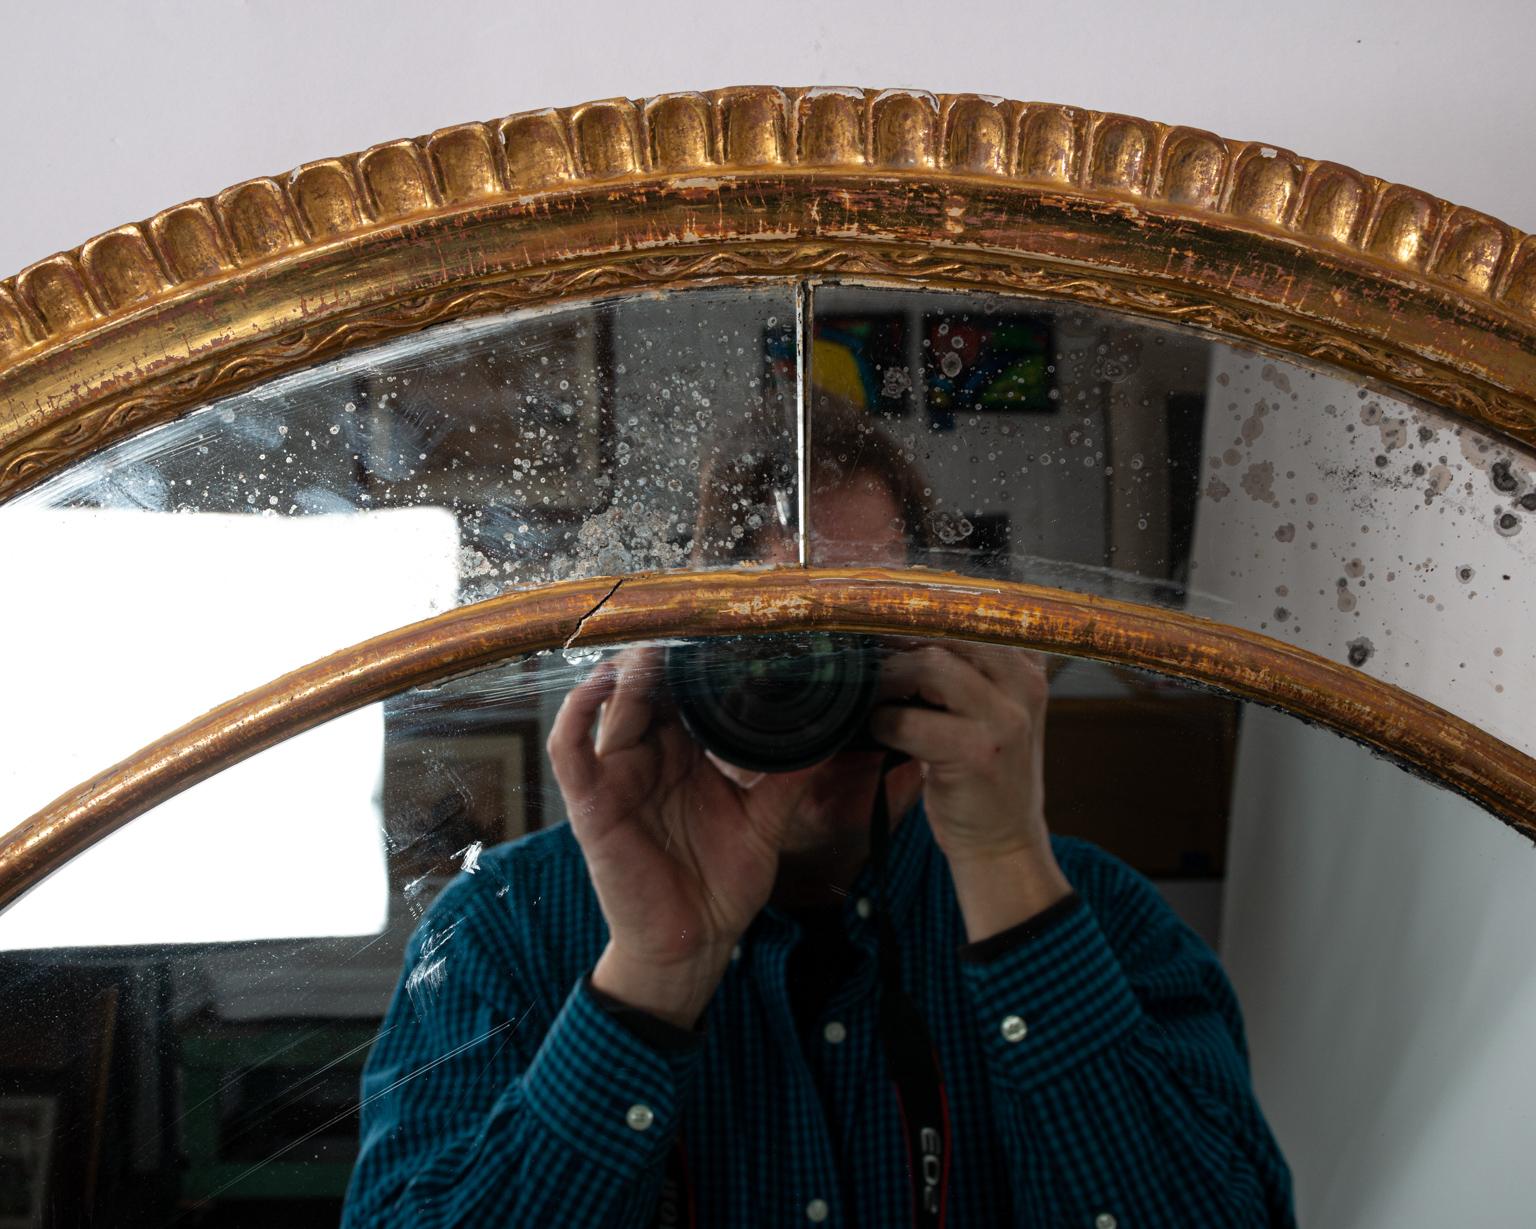 Rounded arch gilt mirror with smokey mirror insets and scalloped edges, circa 20th century. Please note of wear consistent with age and use including a crack in the mirror inset at the bottom along with oxidation. There is also some rubbing to the